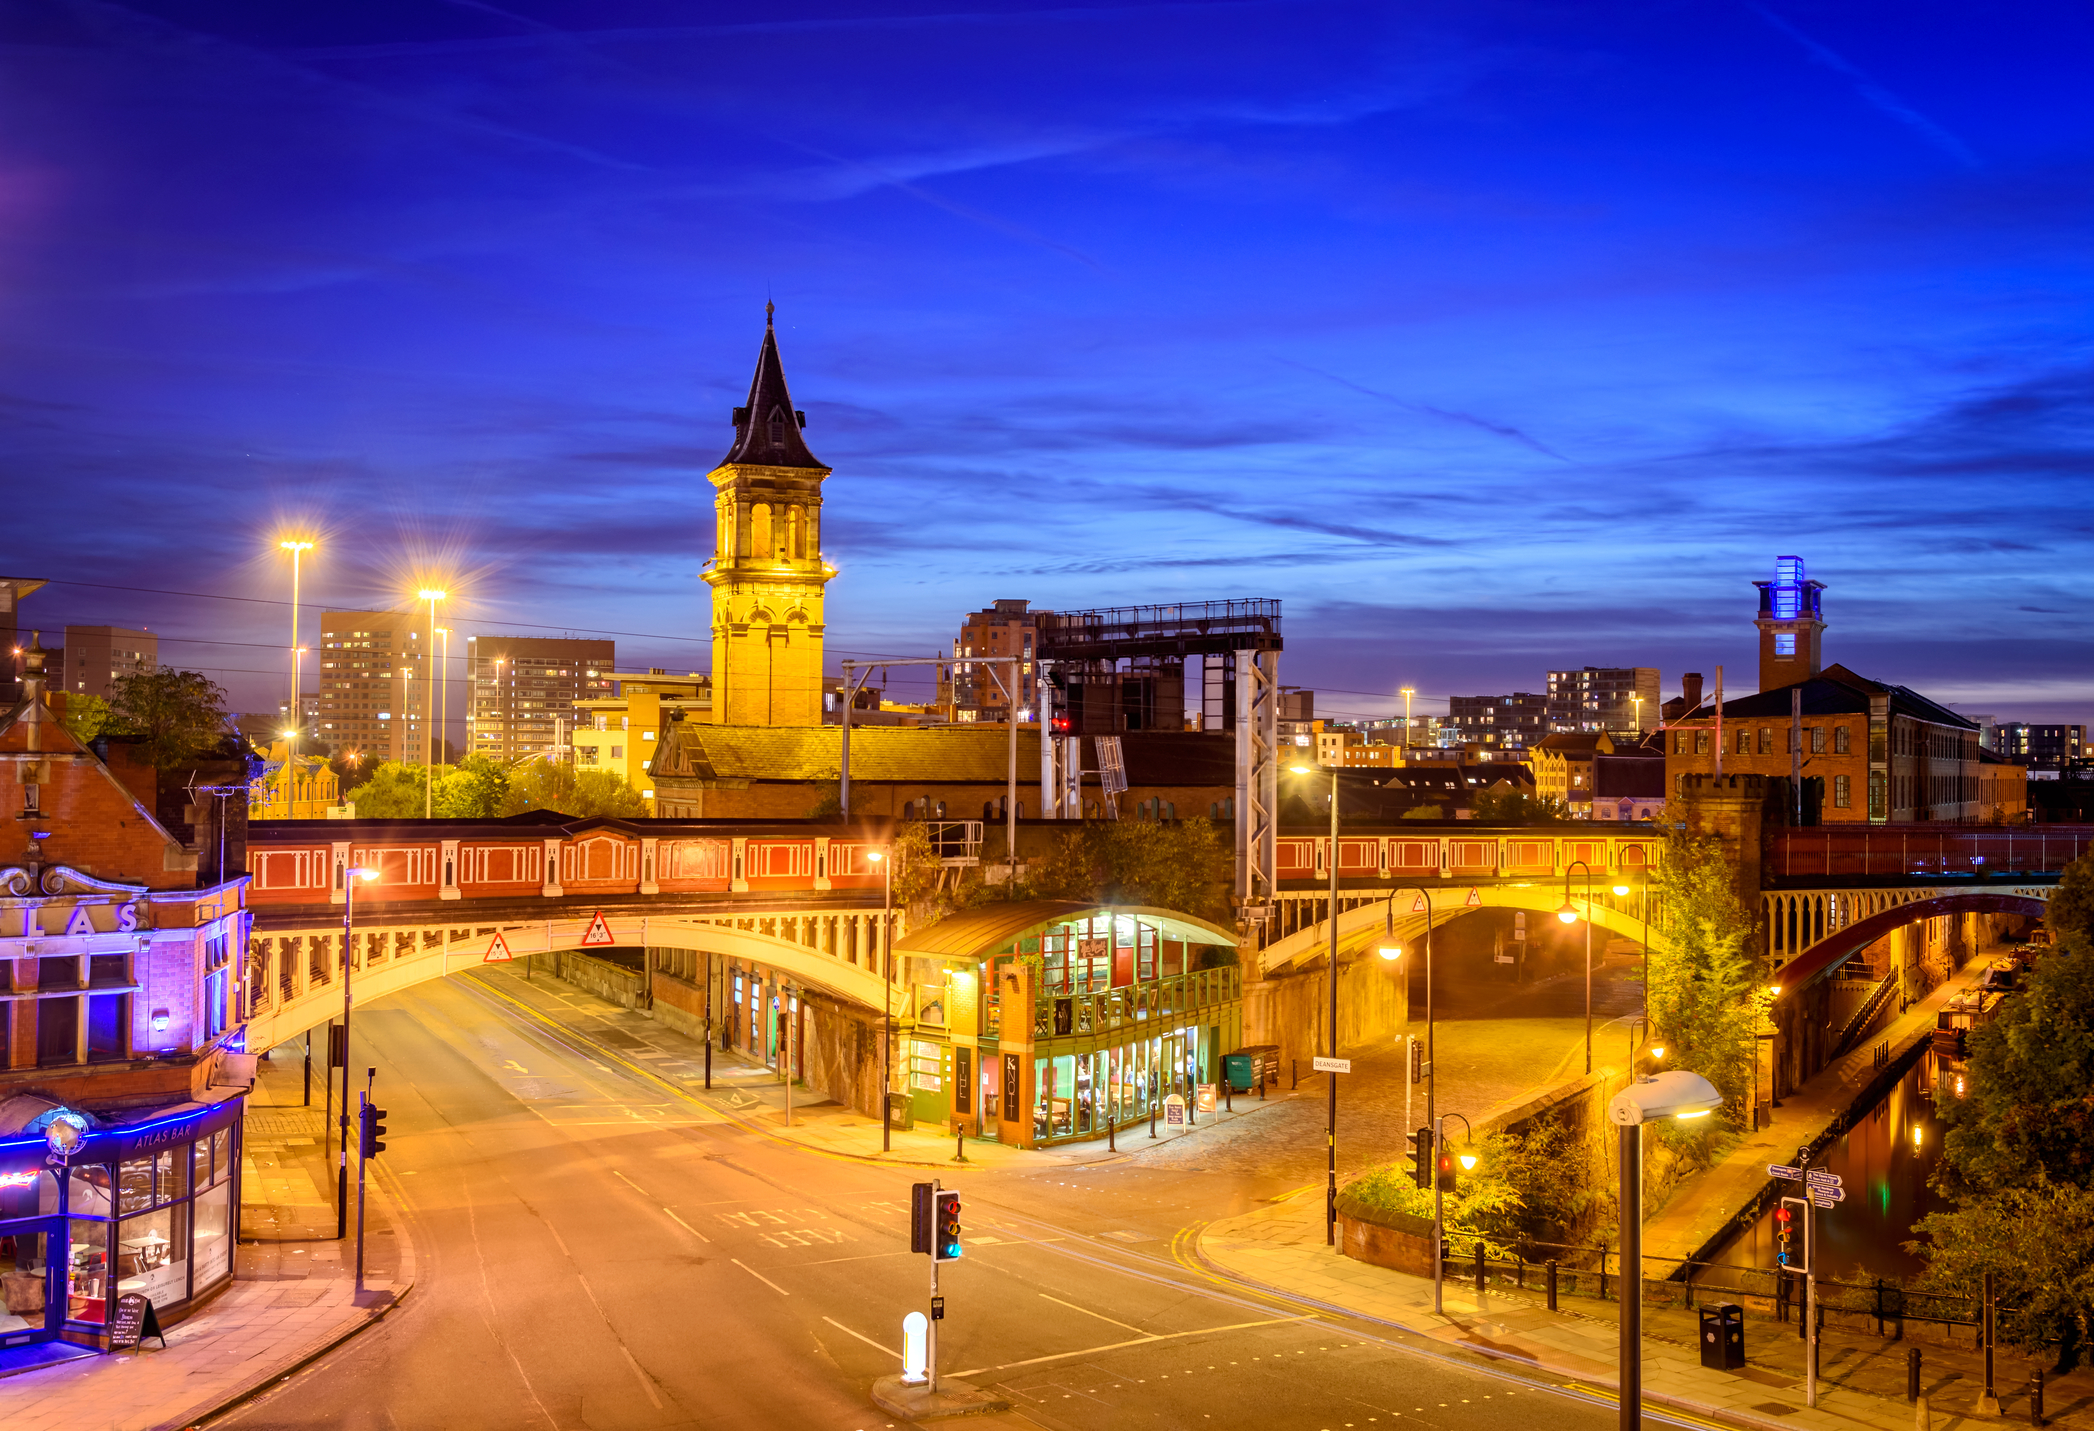 Flights to Manchester, England in the $400s & $500s round-trip